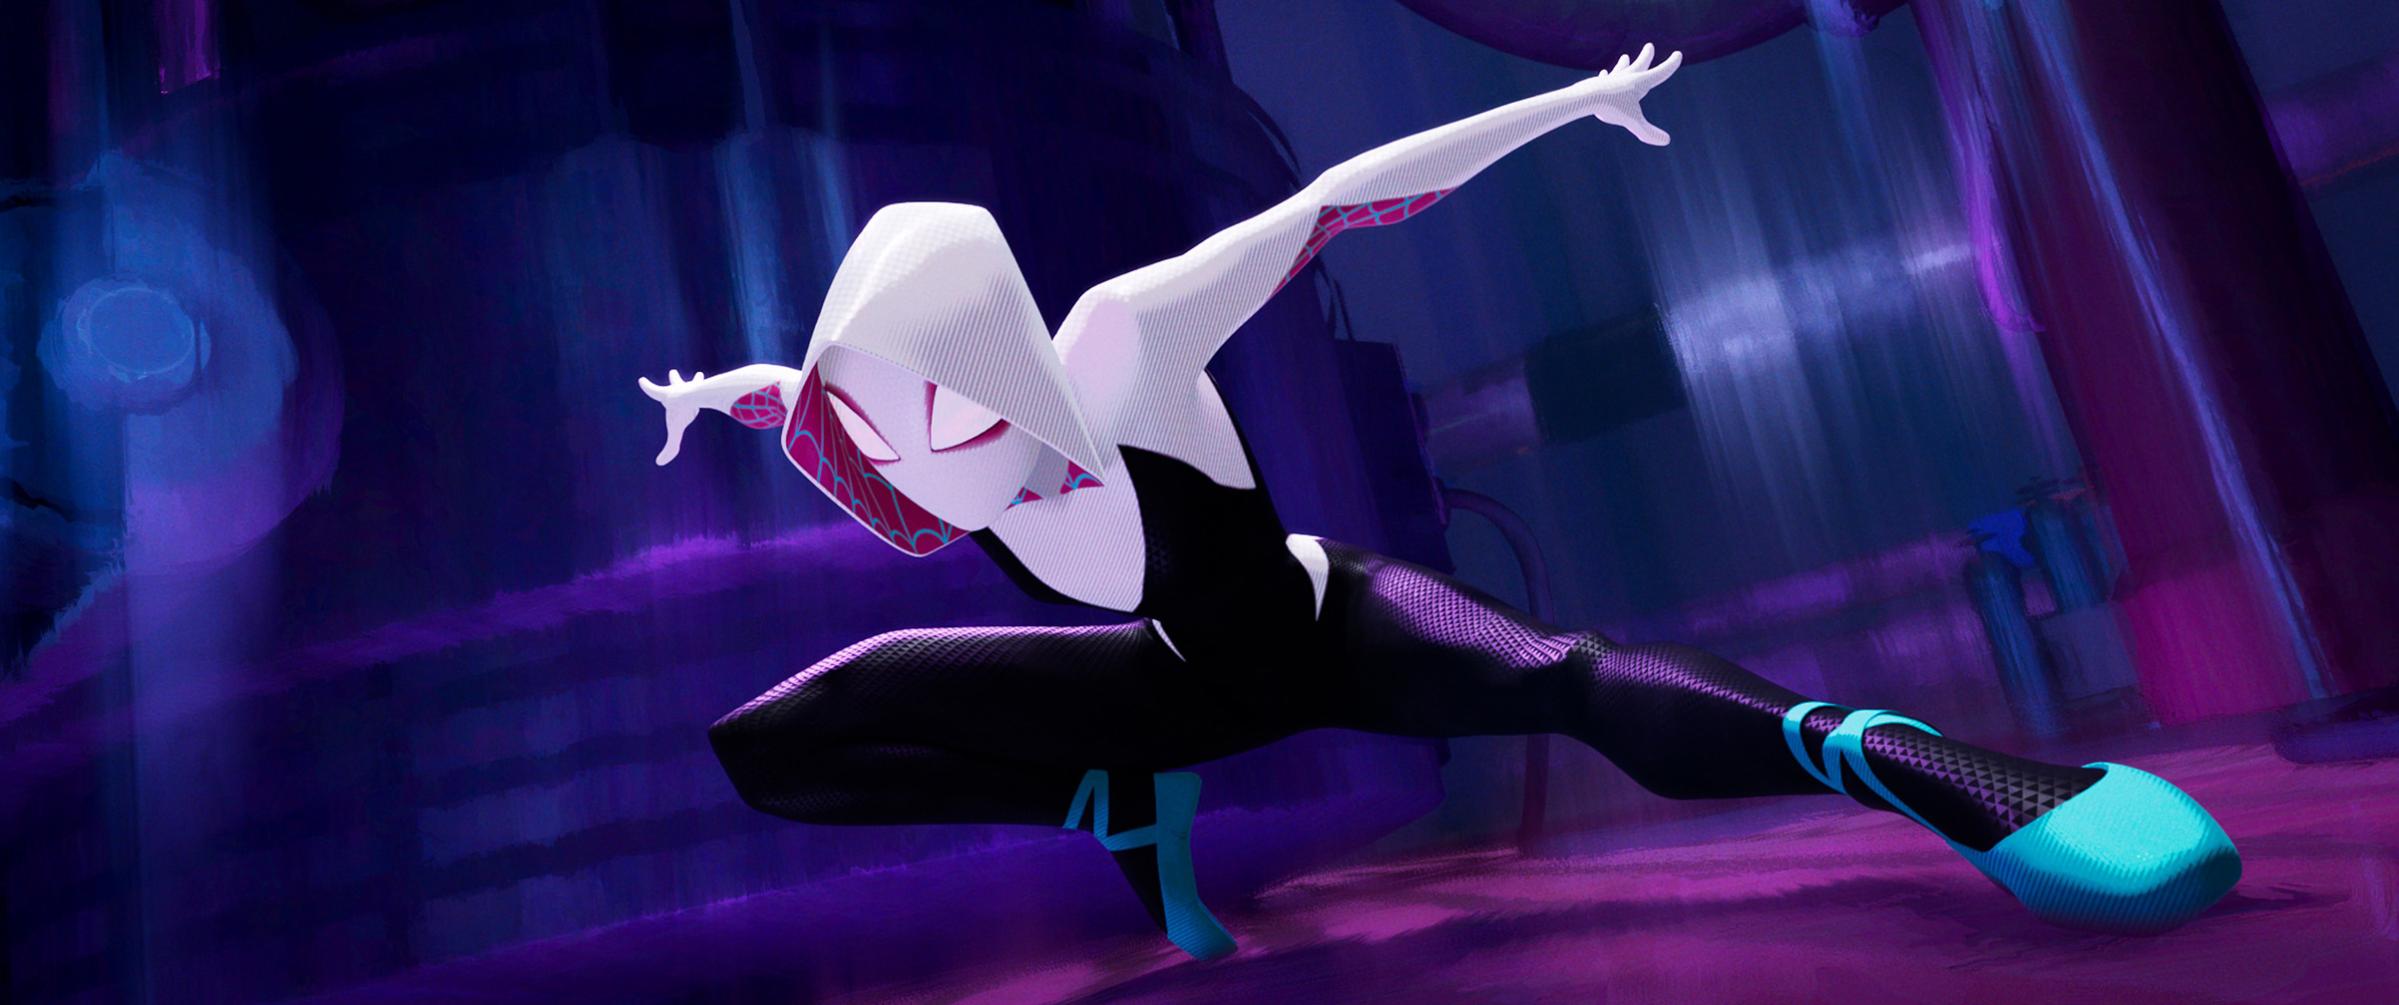 In one of Into the Spider-Verse’s many parallel worlds, Peter’s friend Gwen Stacy gets bitten by the radioactive spider. She becomes the hero and Peter the one who needs saving.